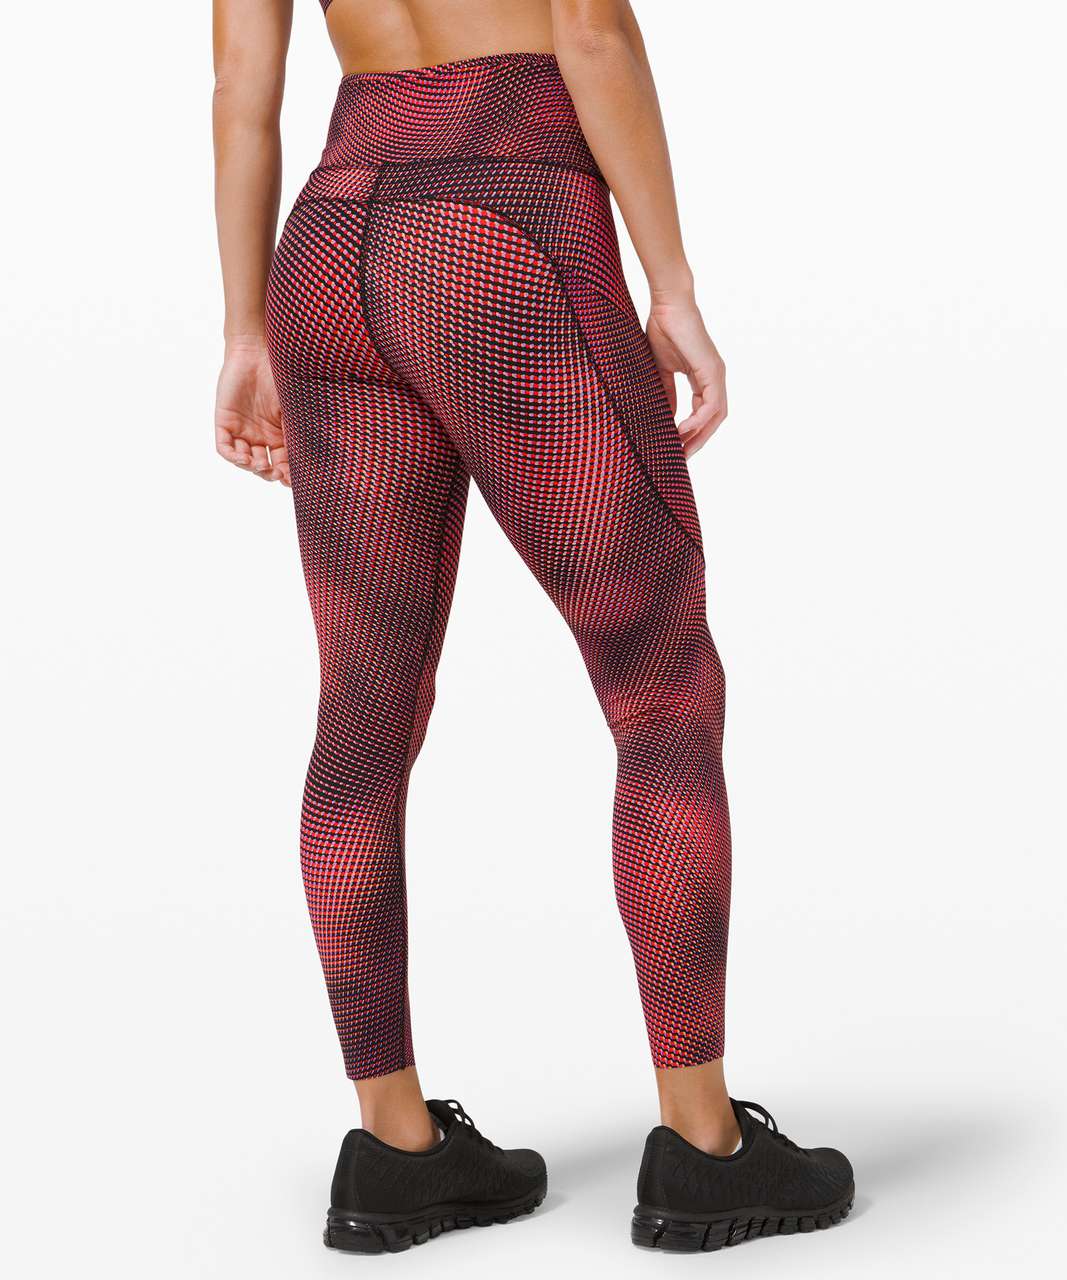 Lululemon Fast and Free Tight II 25 *SeaWheeze - Race Pace Flare